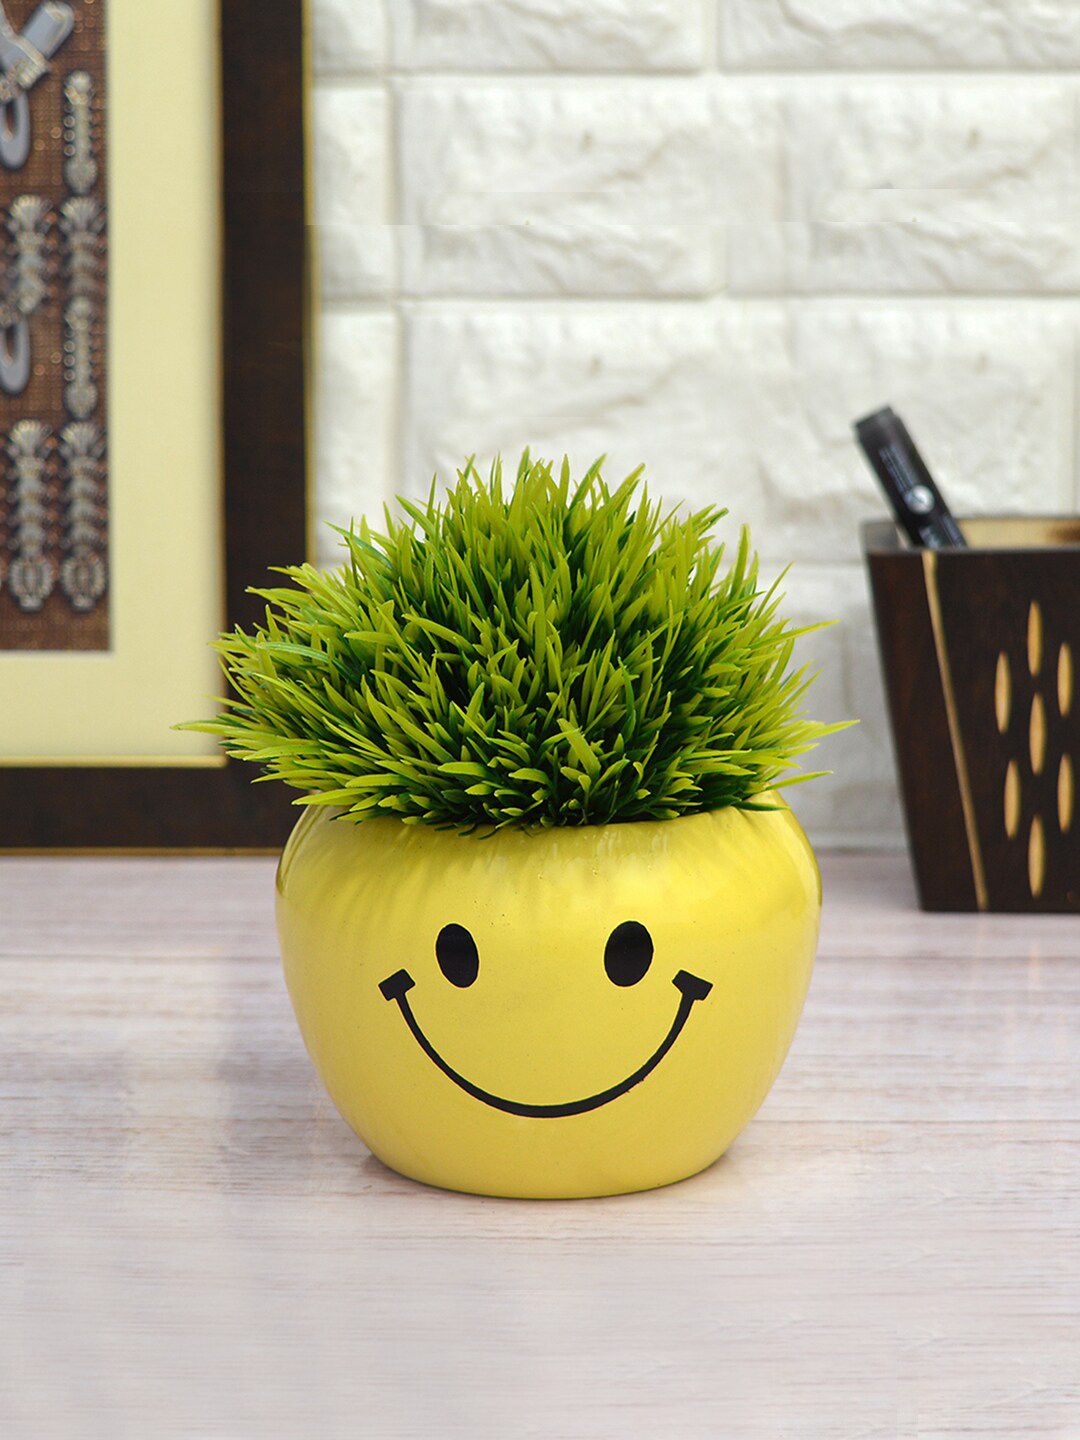 fancy mart Green & Yellow Artificial Grass Topiary With Smiley Pot Price in India